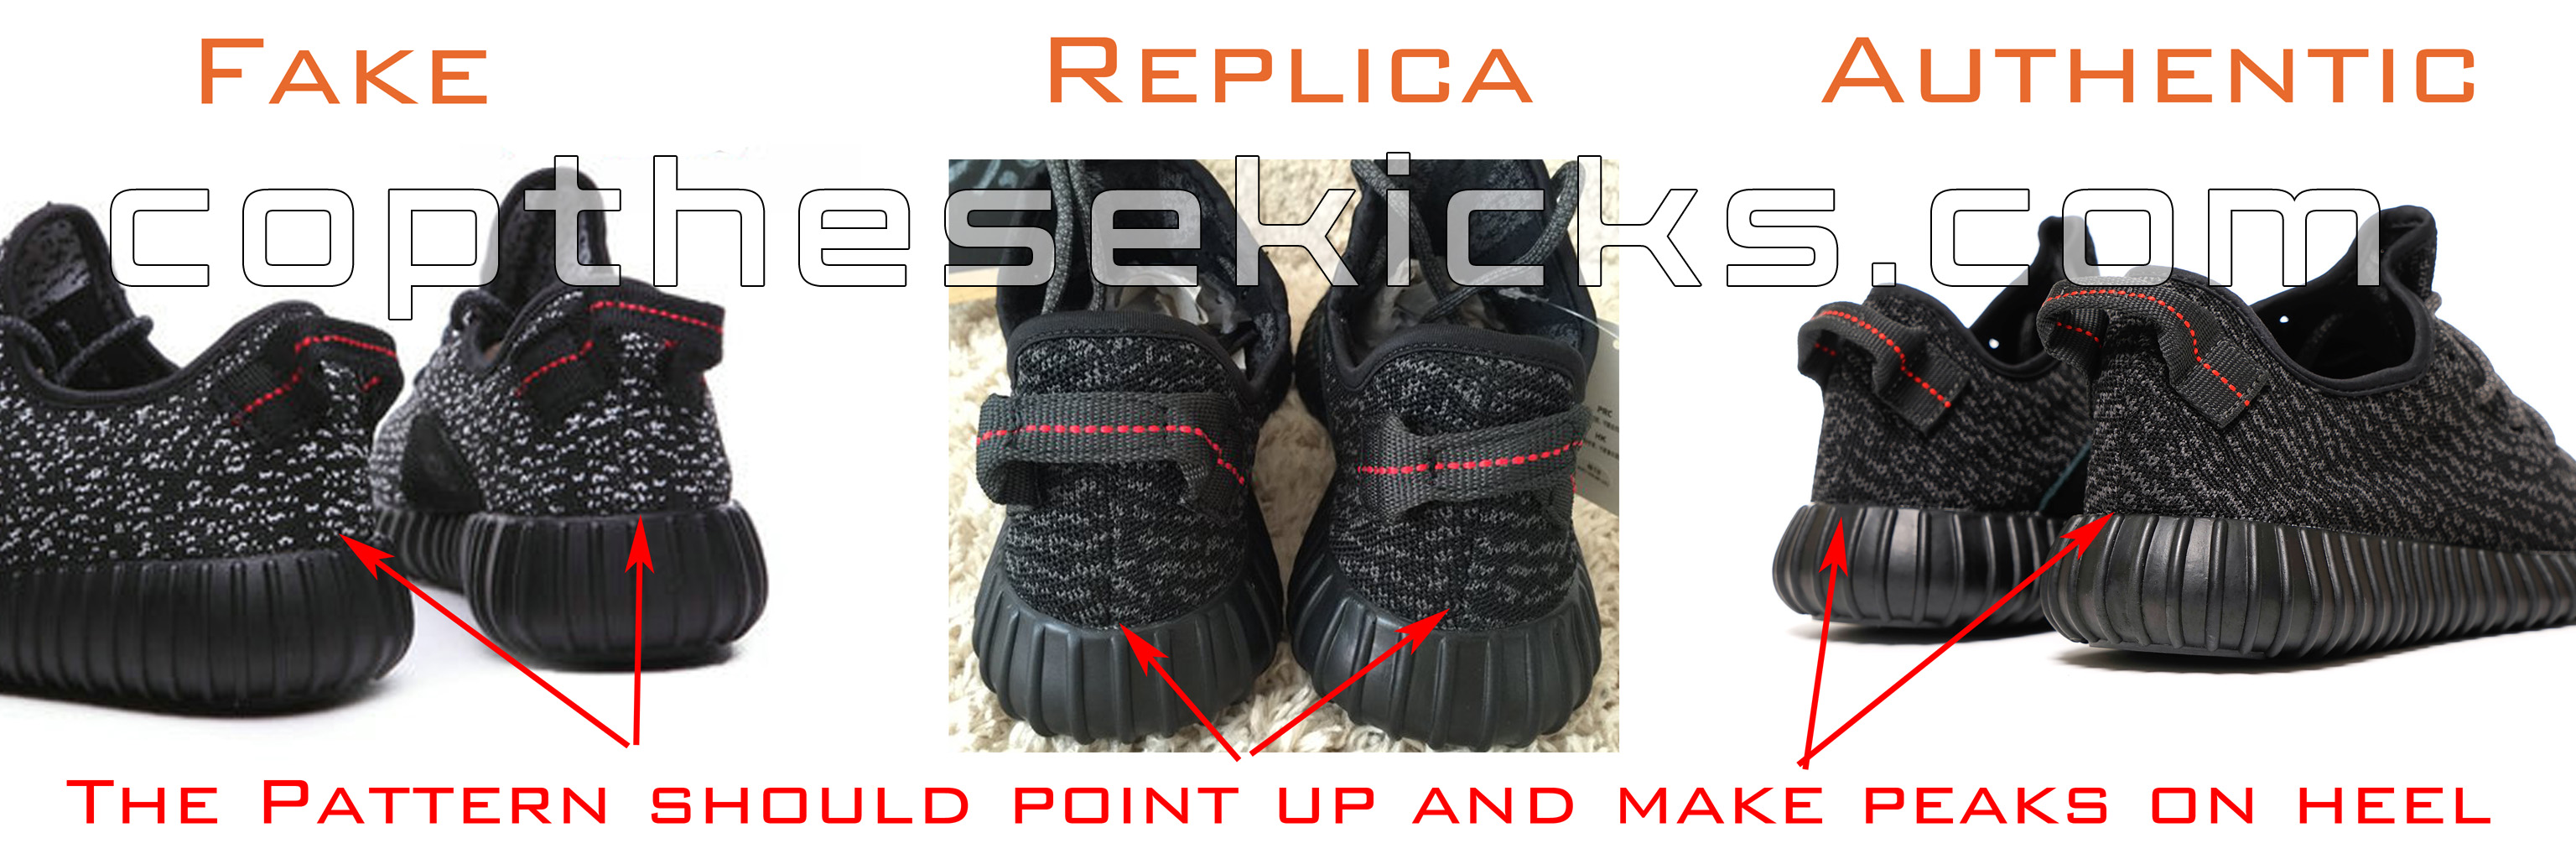 Real Vs Fake Pirate Black Yeezy Boost 350 - Cop These Kicks